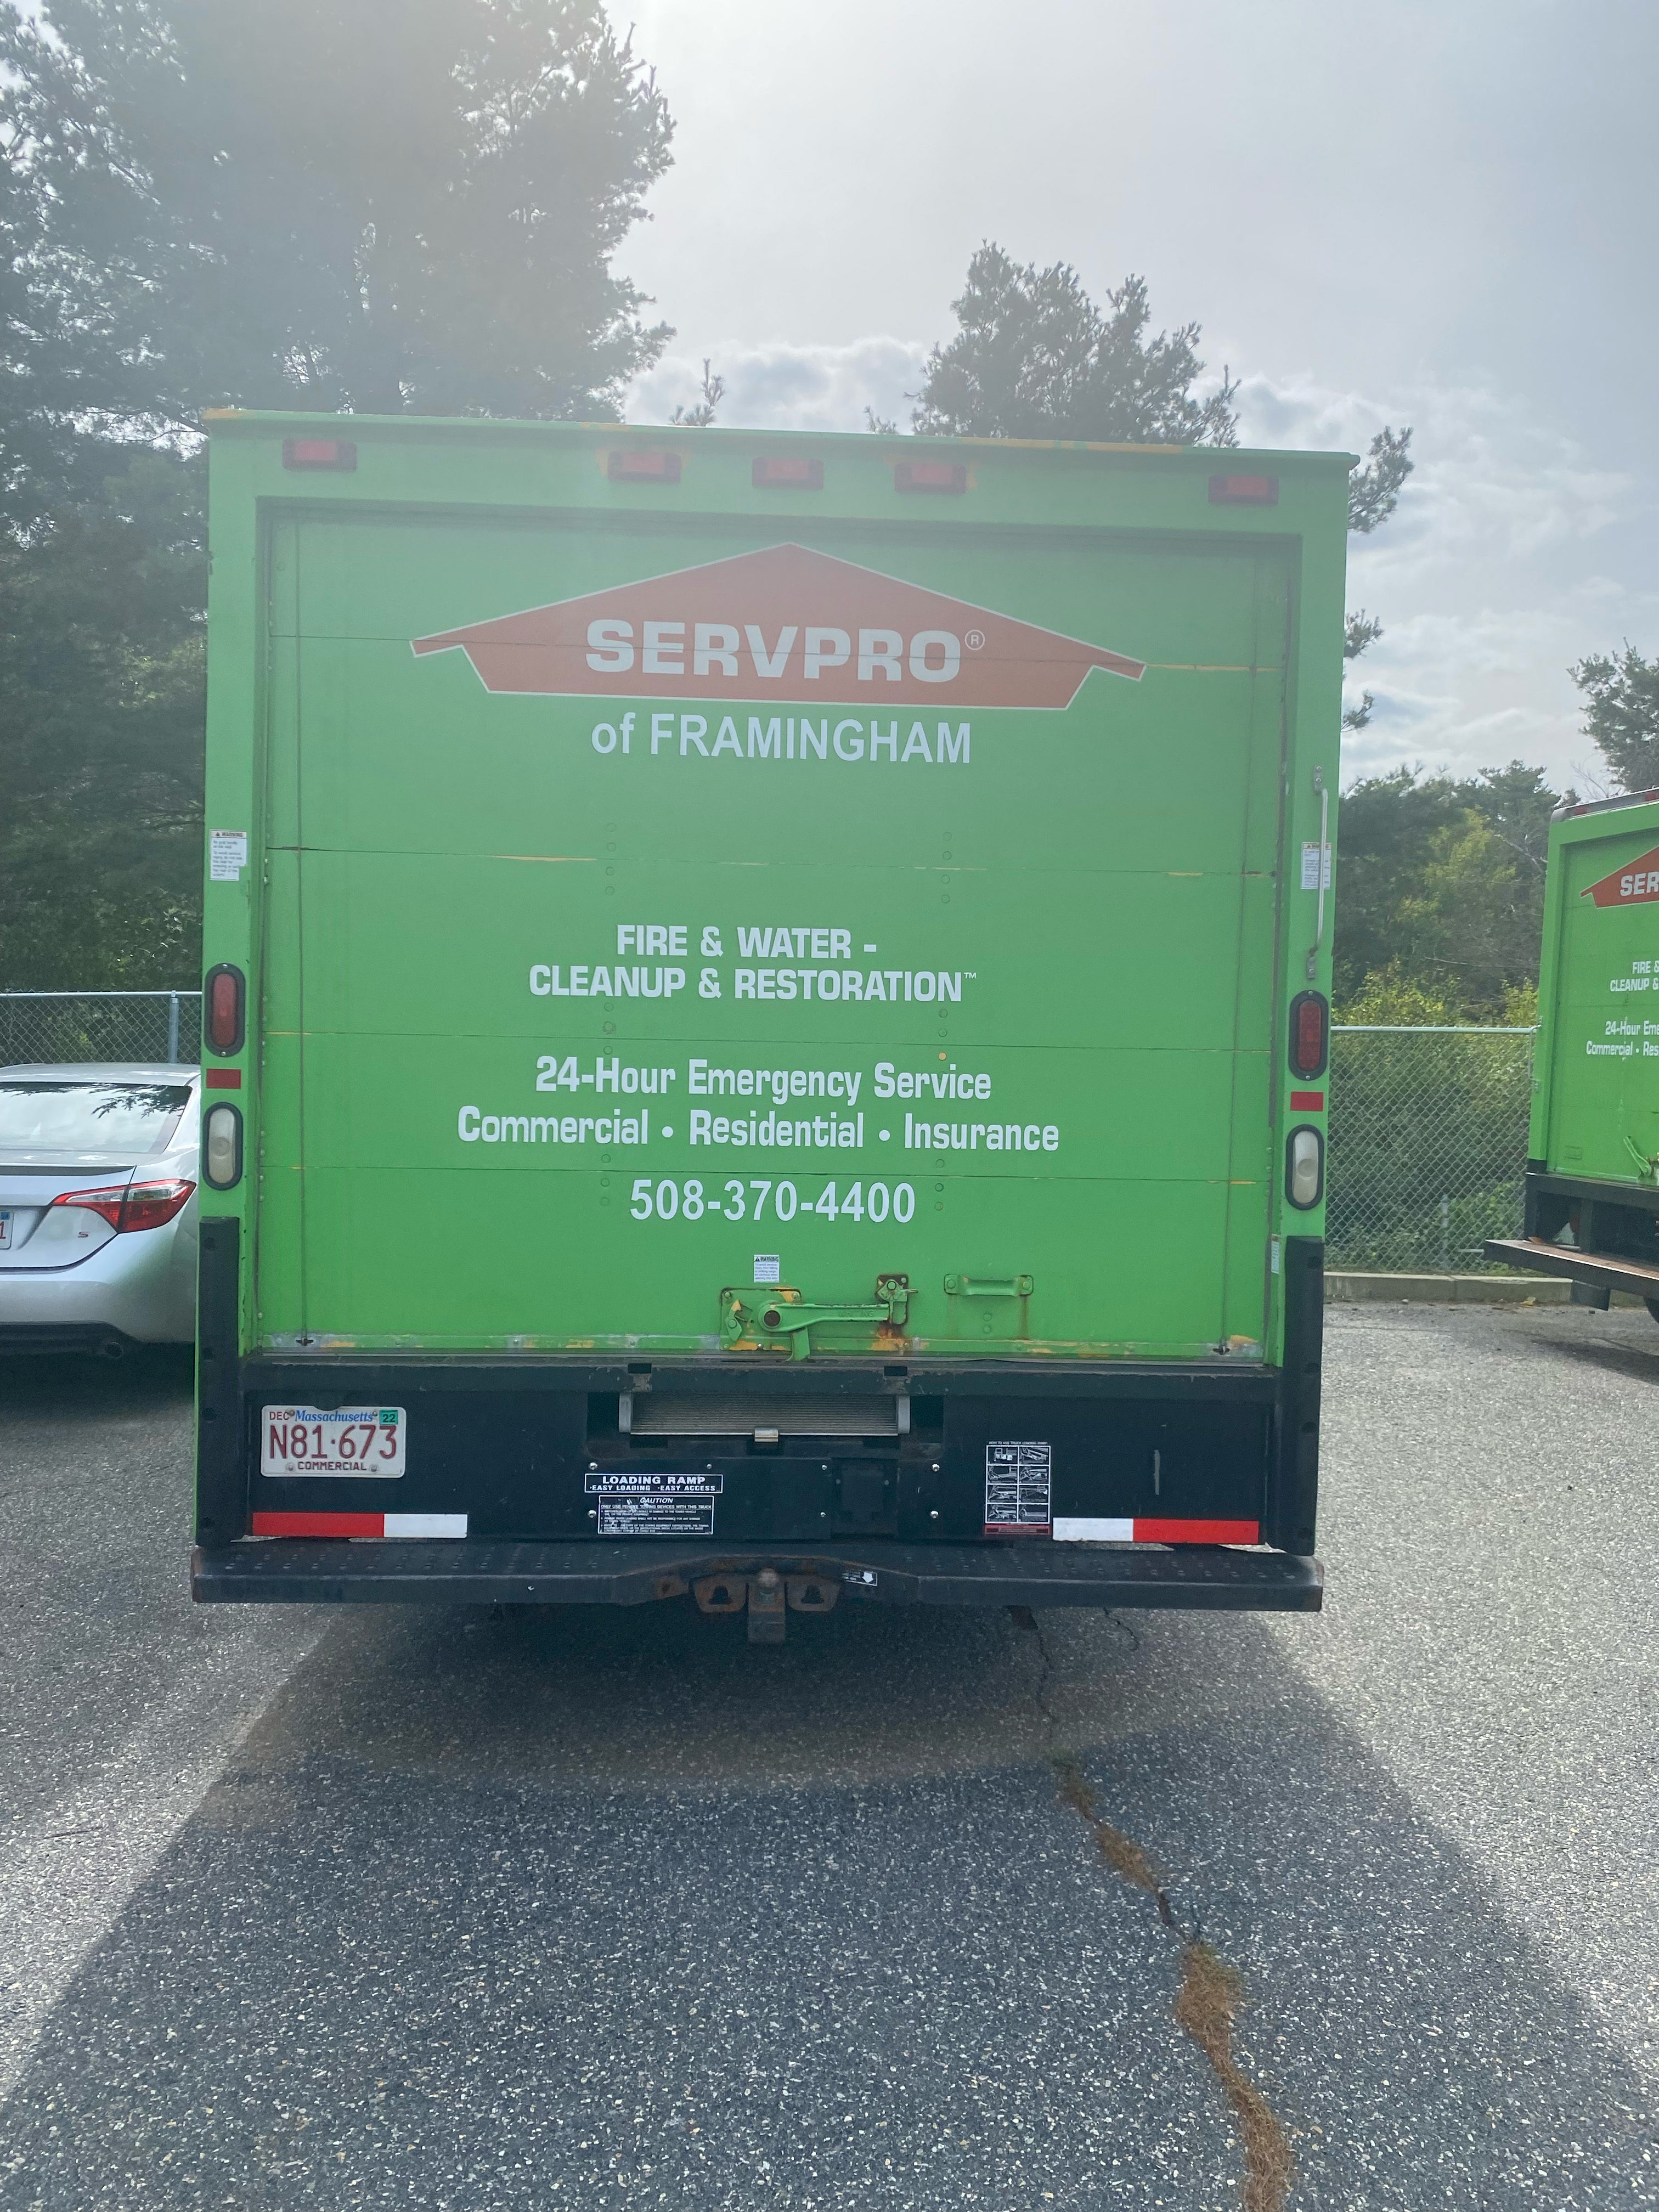 When disaster strikes your residential or commercial property you need trusted experts that will help guide you through the entire process. The experts at SERVPRO of Natick/Milford will do exactly that. We also serve the surrounding communities of Mendon, Blackstone, Holliston, North Natick, South Natick, and Hopedale.